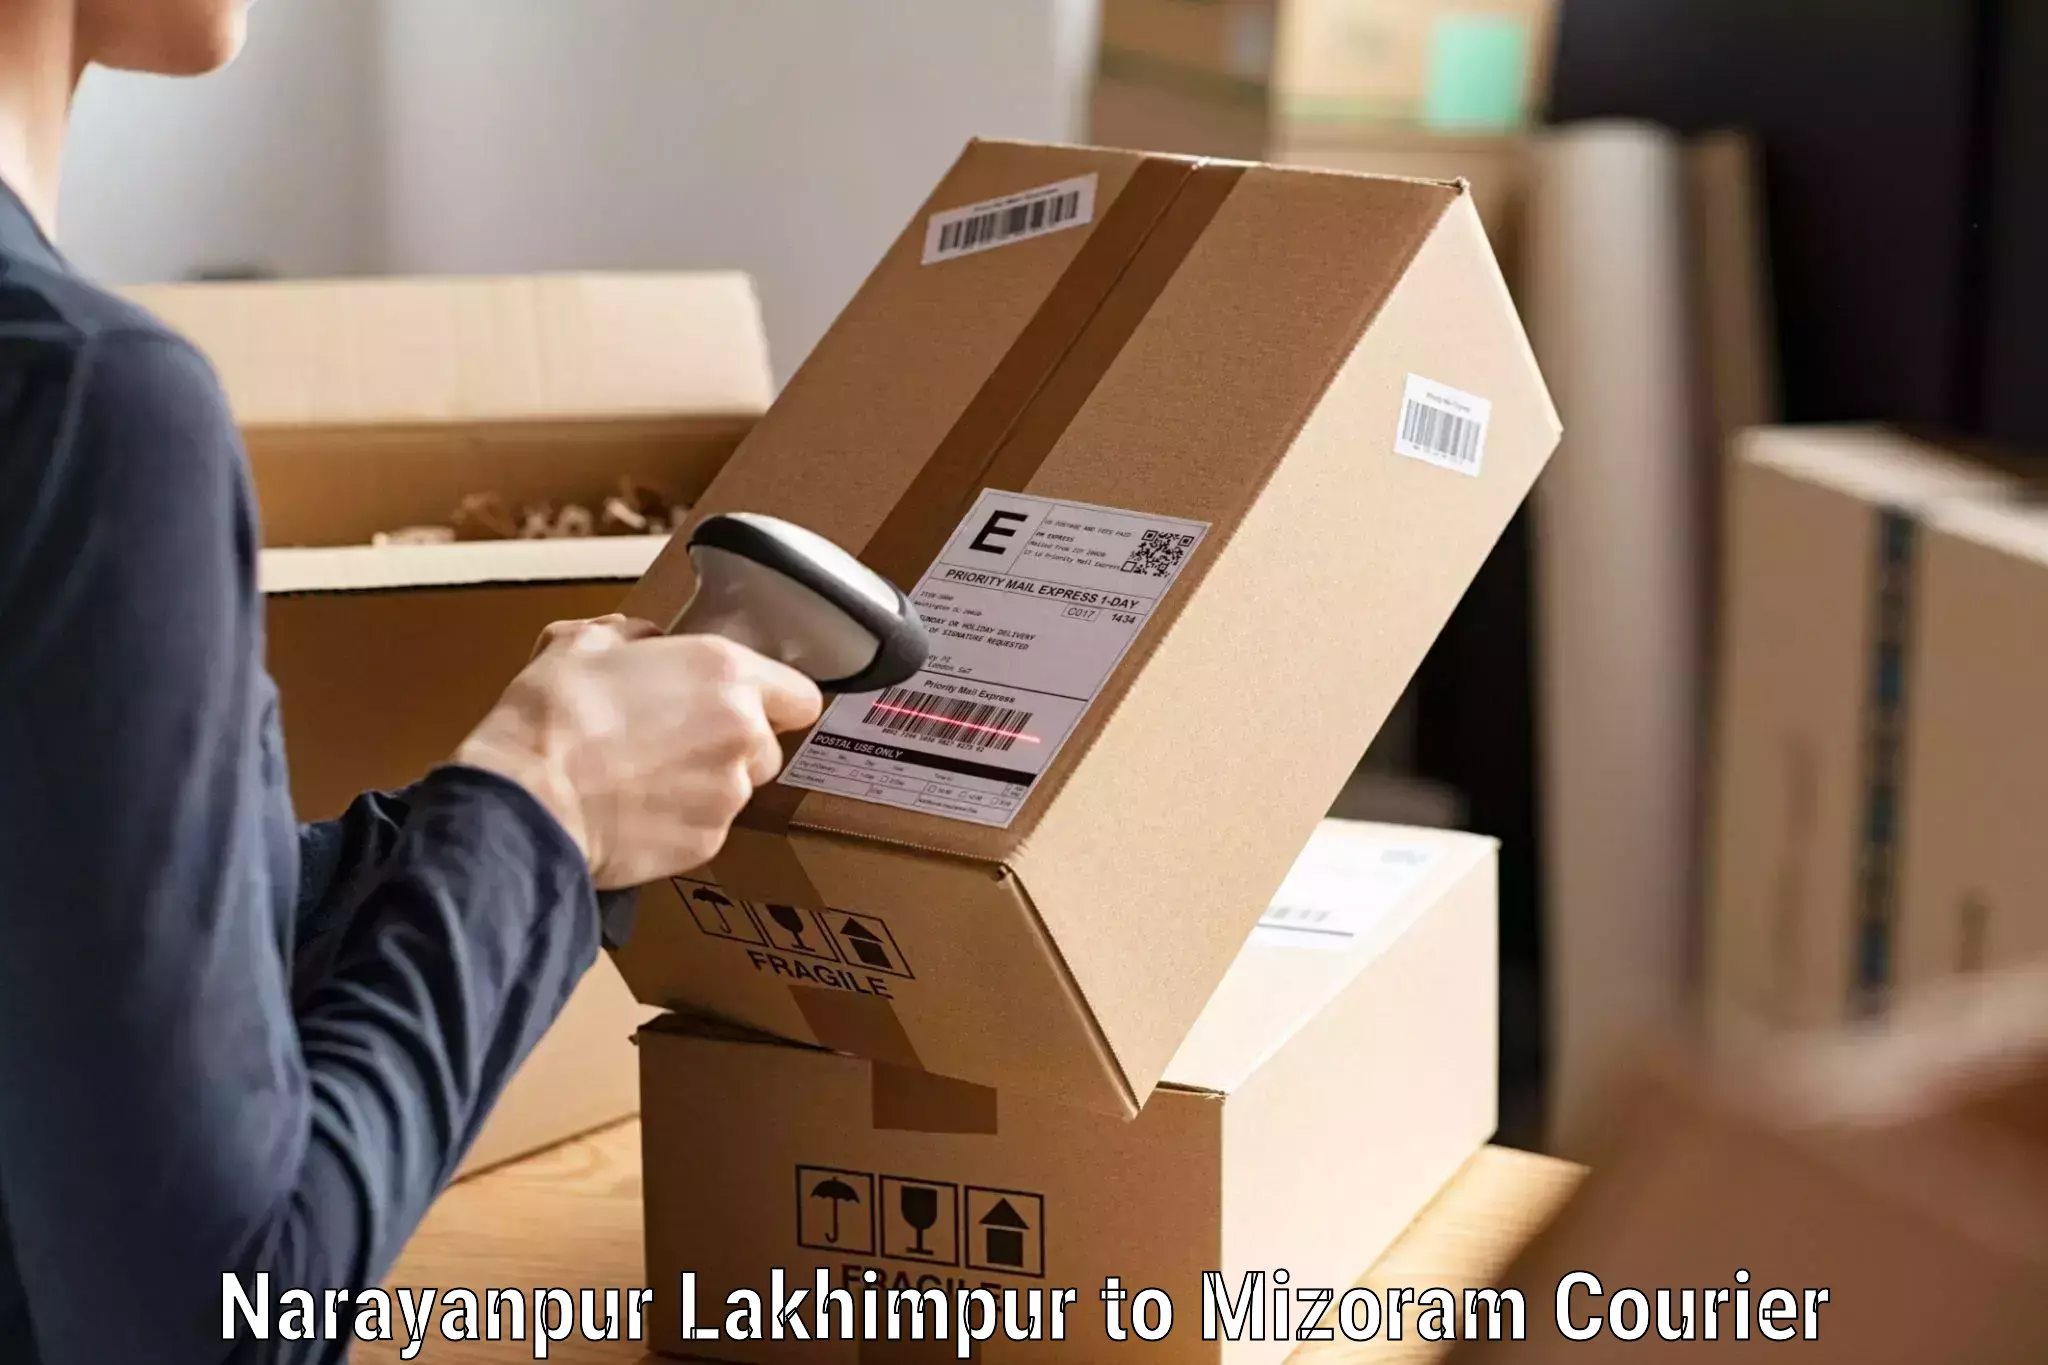 User-friendly delivery service Narayanpur Lakhimpur to Siaha